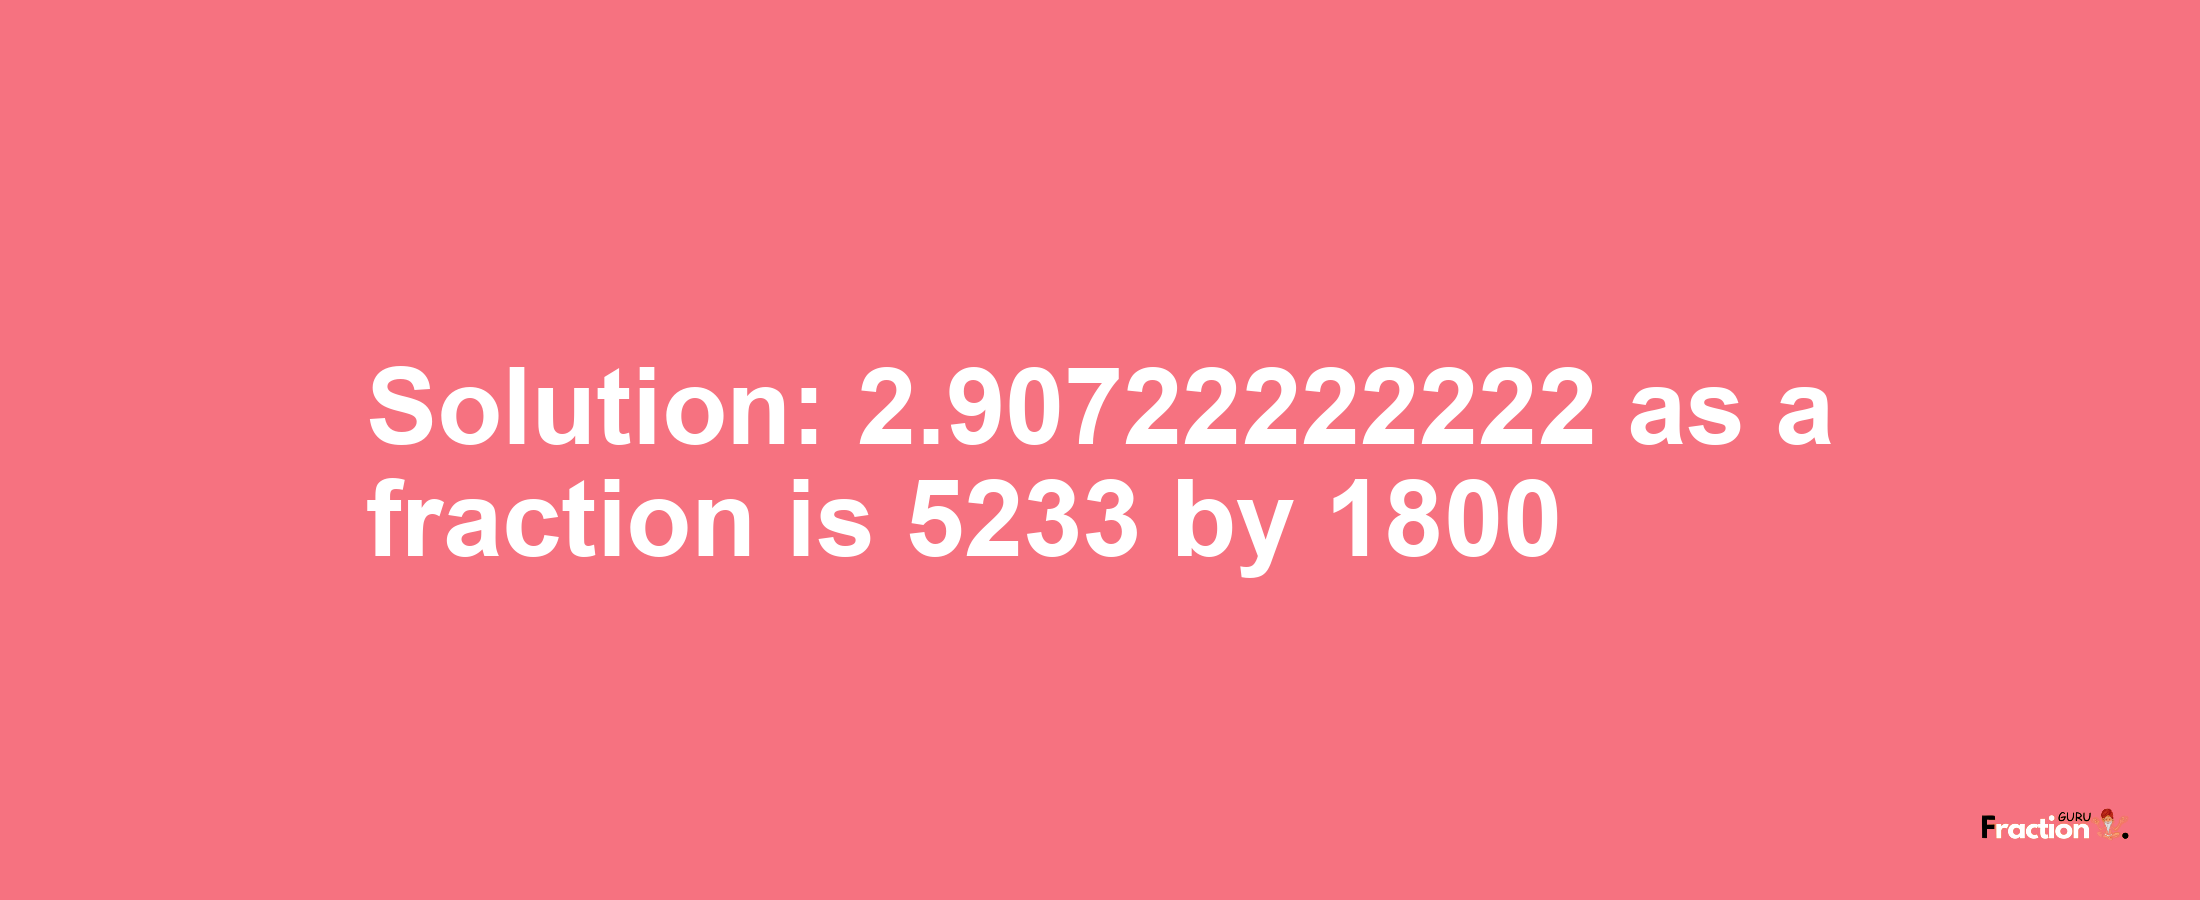 Solution:2.90722222222 as a fraction is 5233/1800